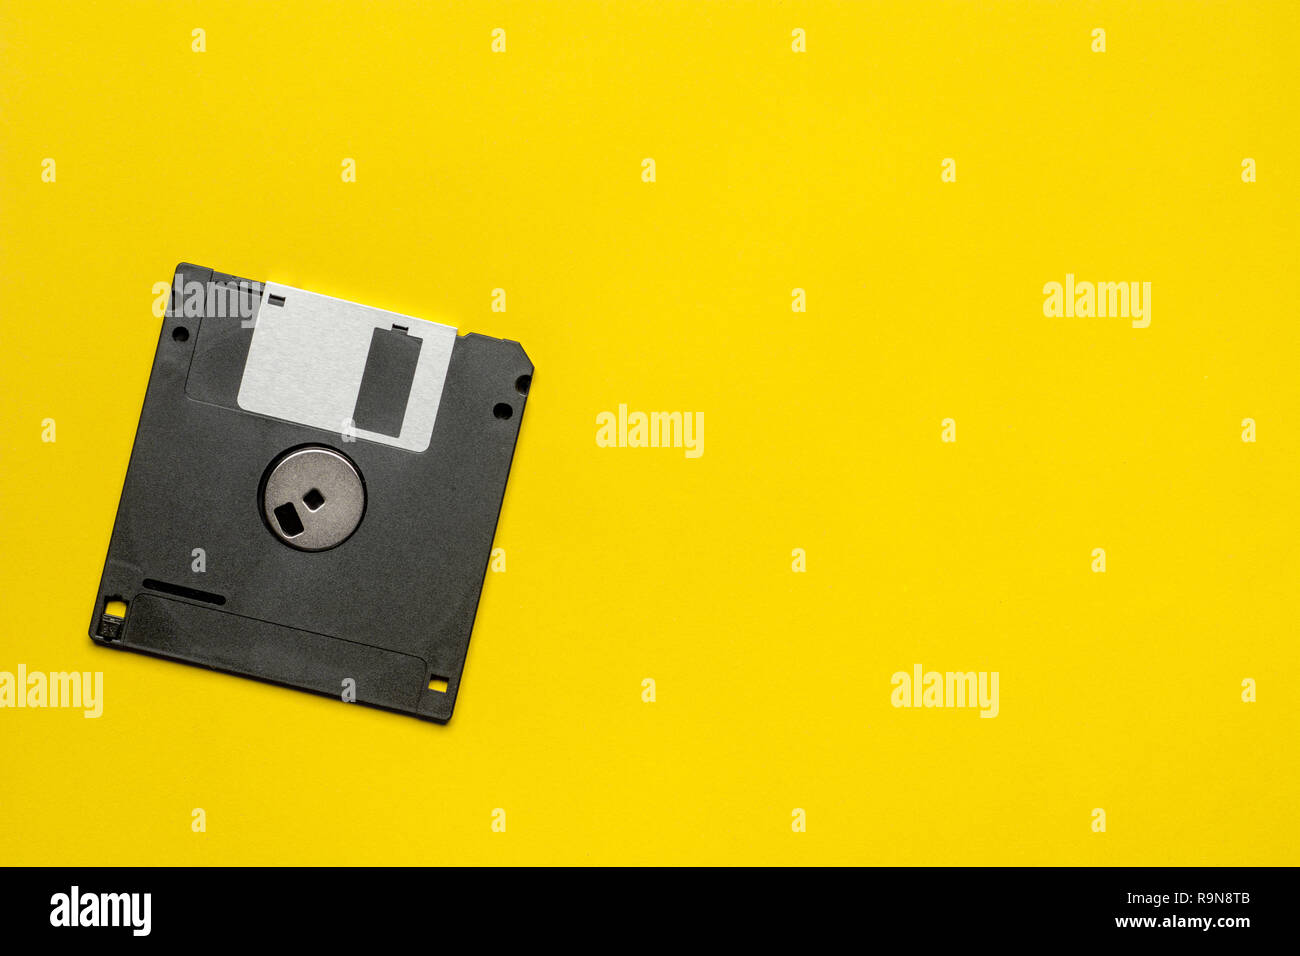 Floppy disk 3.5 inch nostalgia on yellow color background for creative design, printing, gift card, flyer, magazine Stock Photo